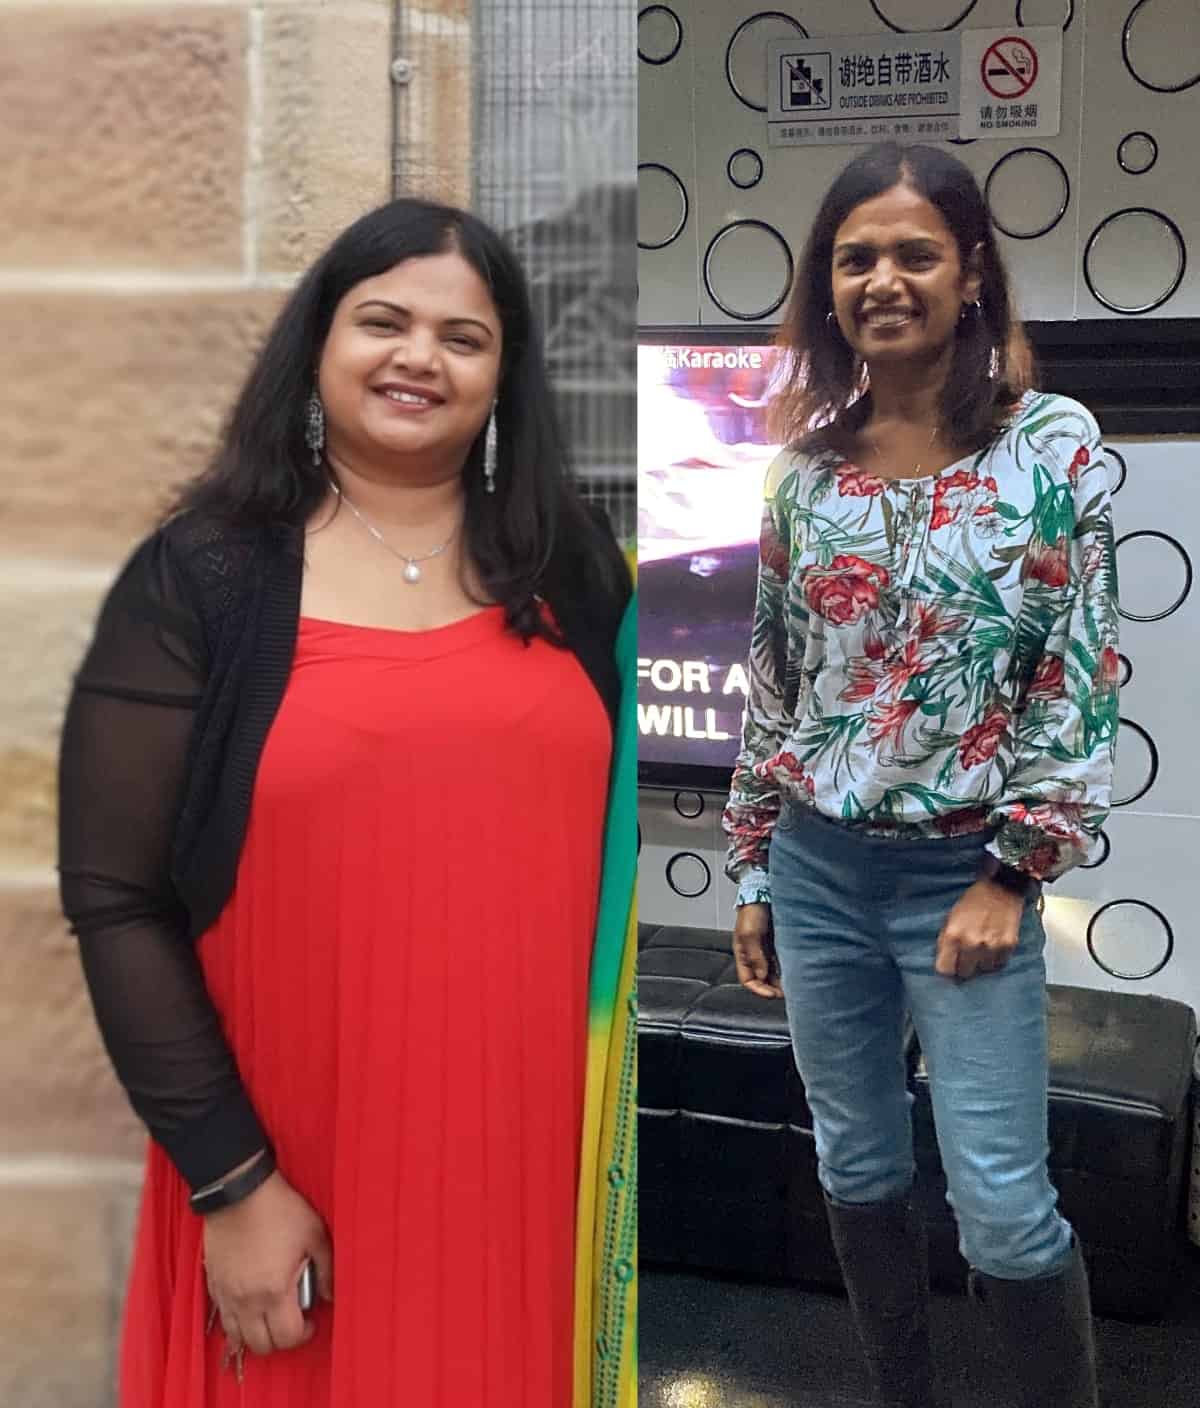 Veronica before and after weight loss journey.